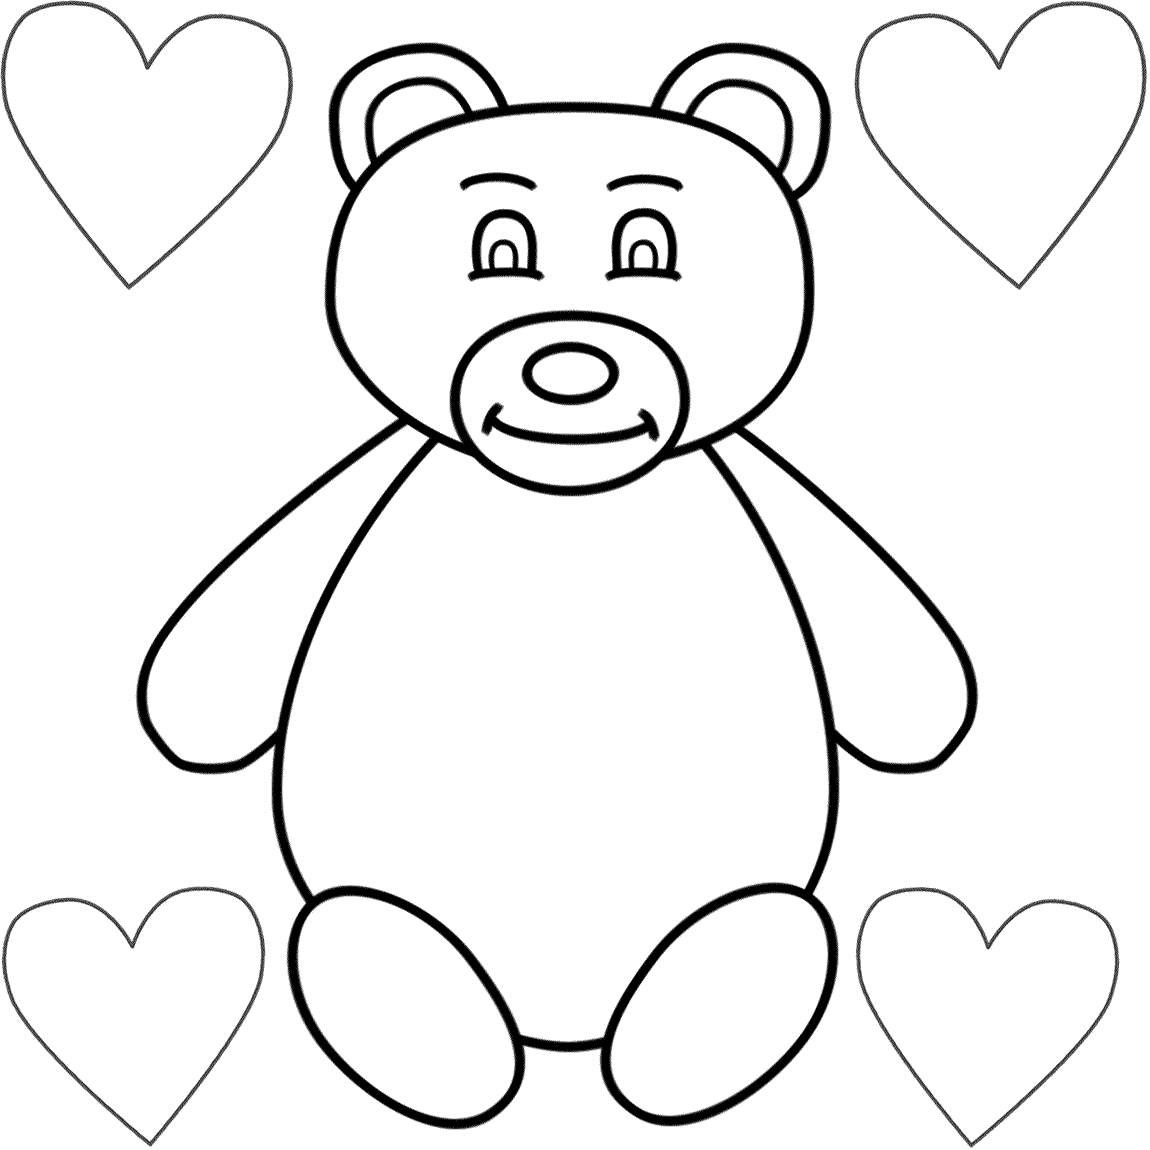 Brown Teddy Bear Coloring Pages - Coloring Pages For All Ages